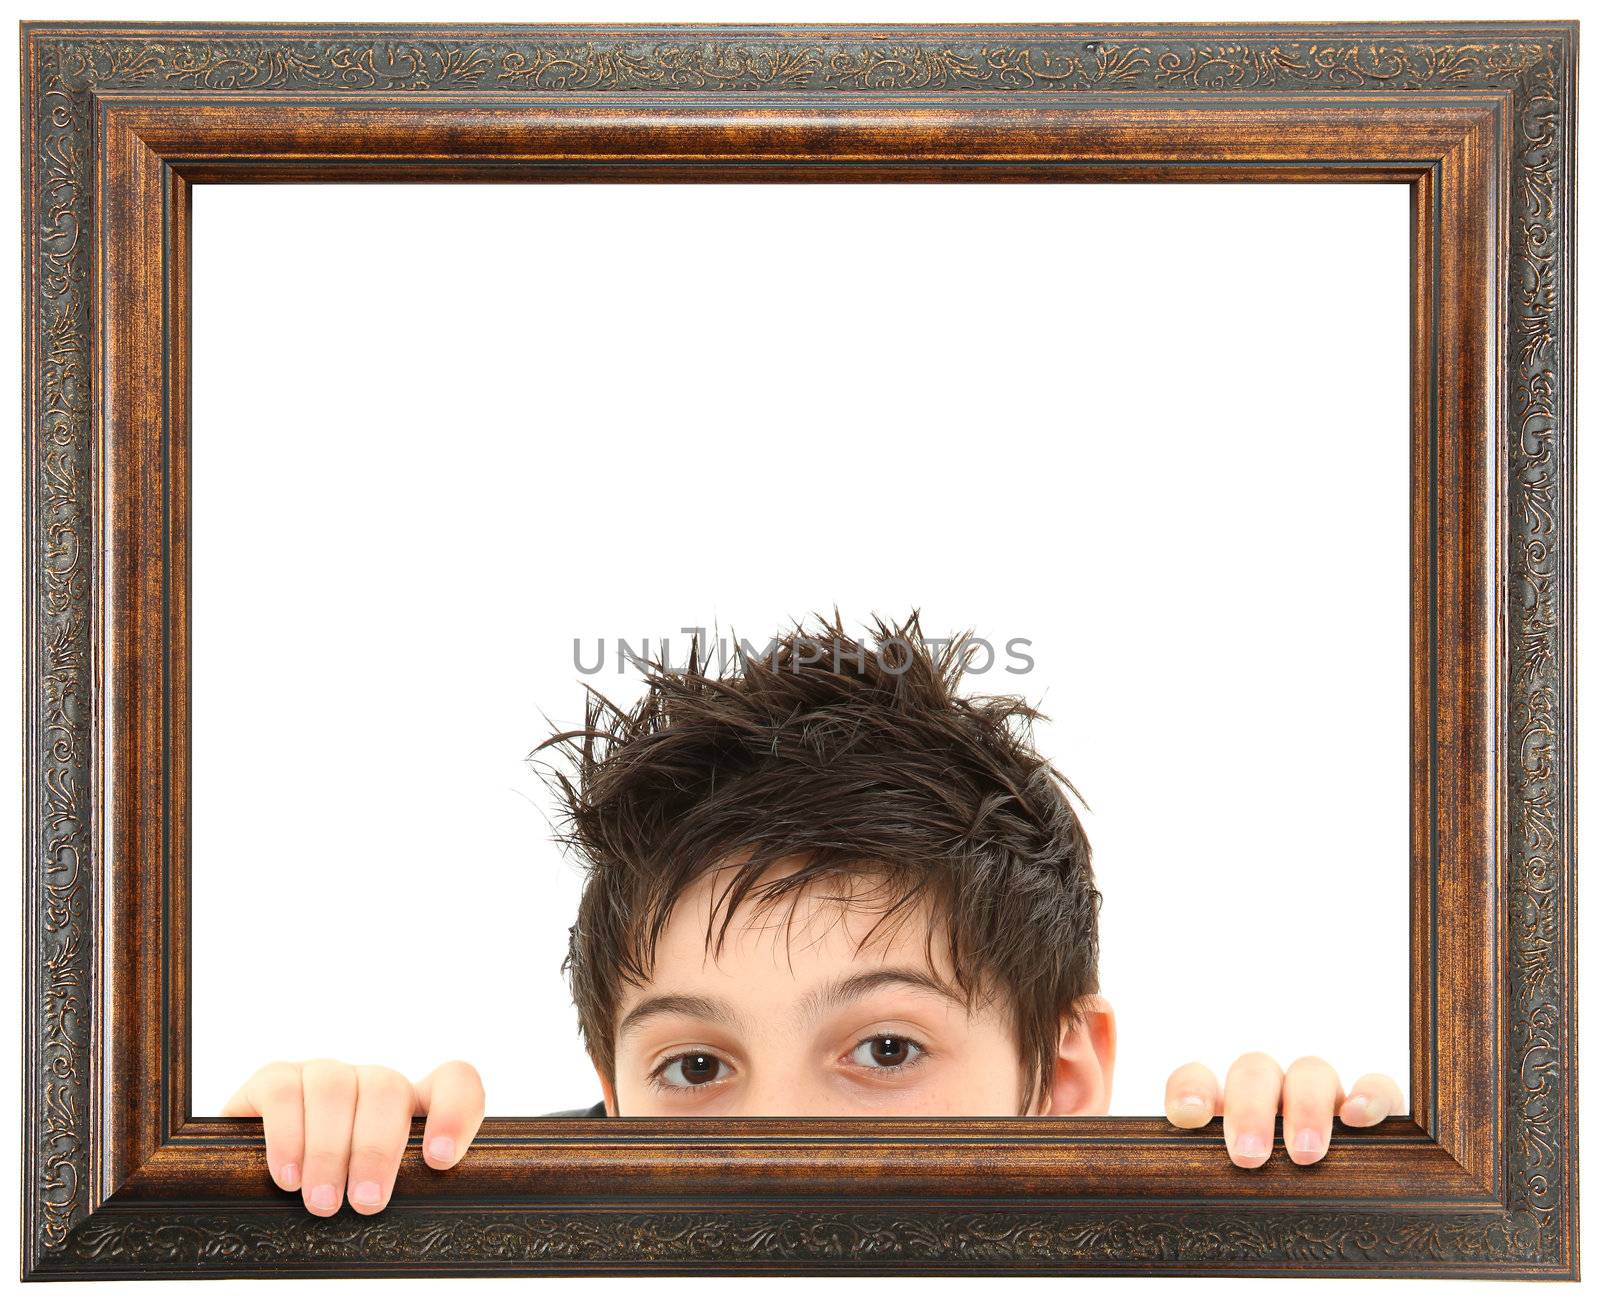 Child Peeking Out of Ornate Wooden Frame by duplass